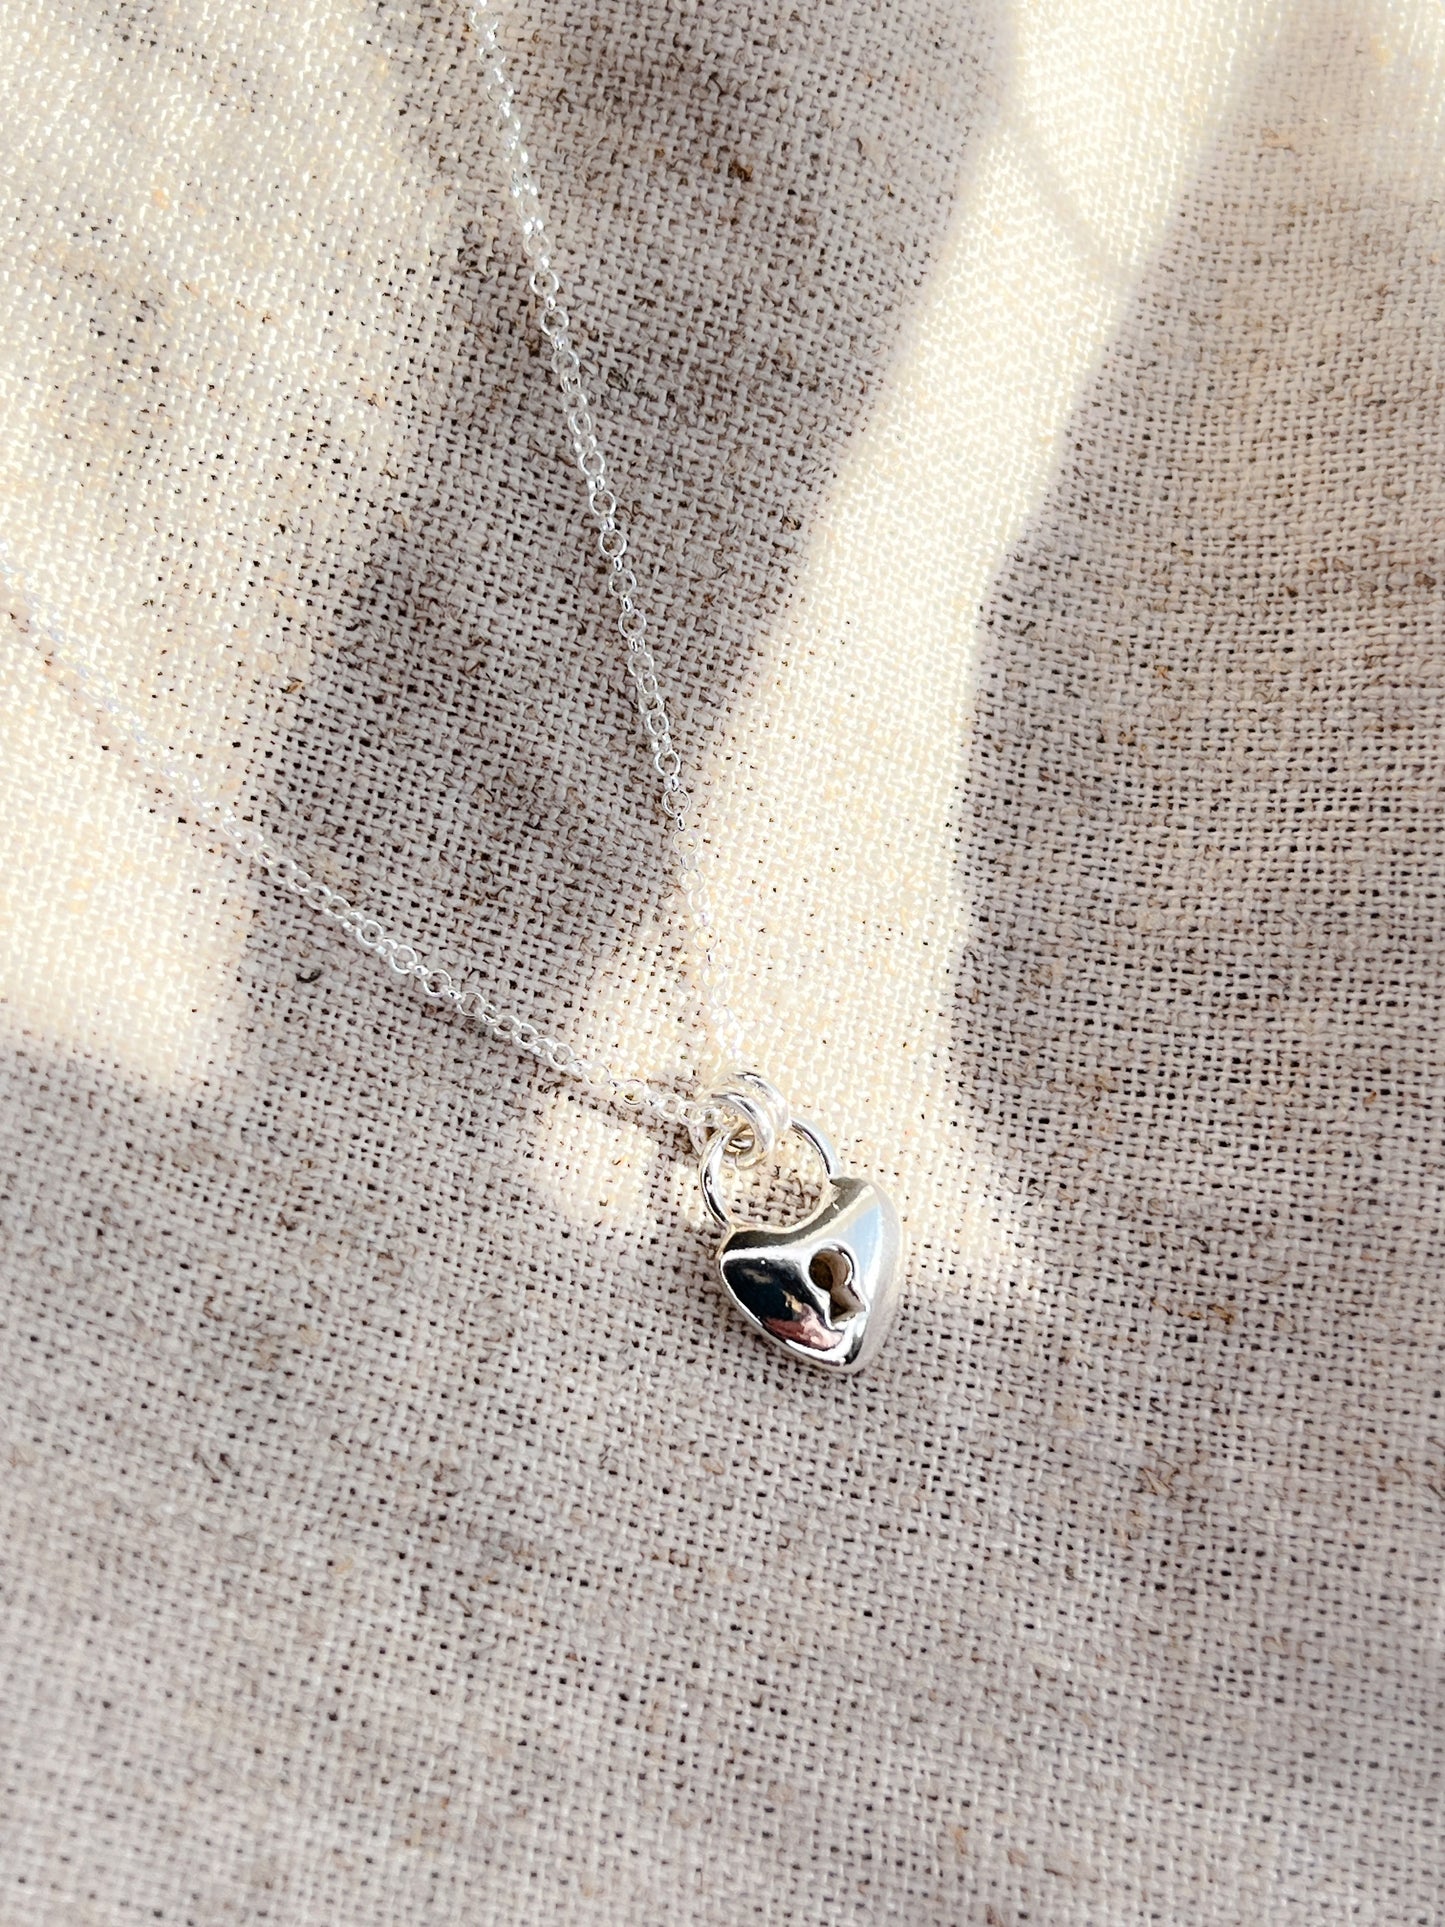 Sterling Silver Heart Padlock Charm Necklace